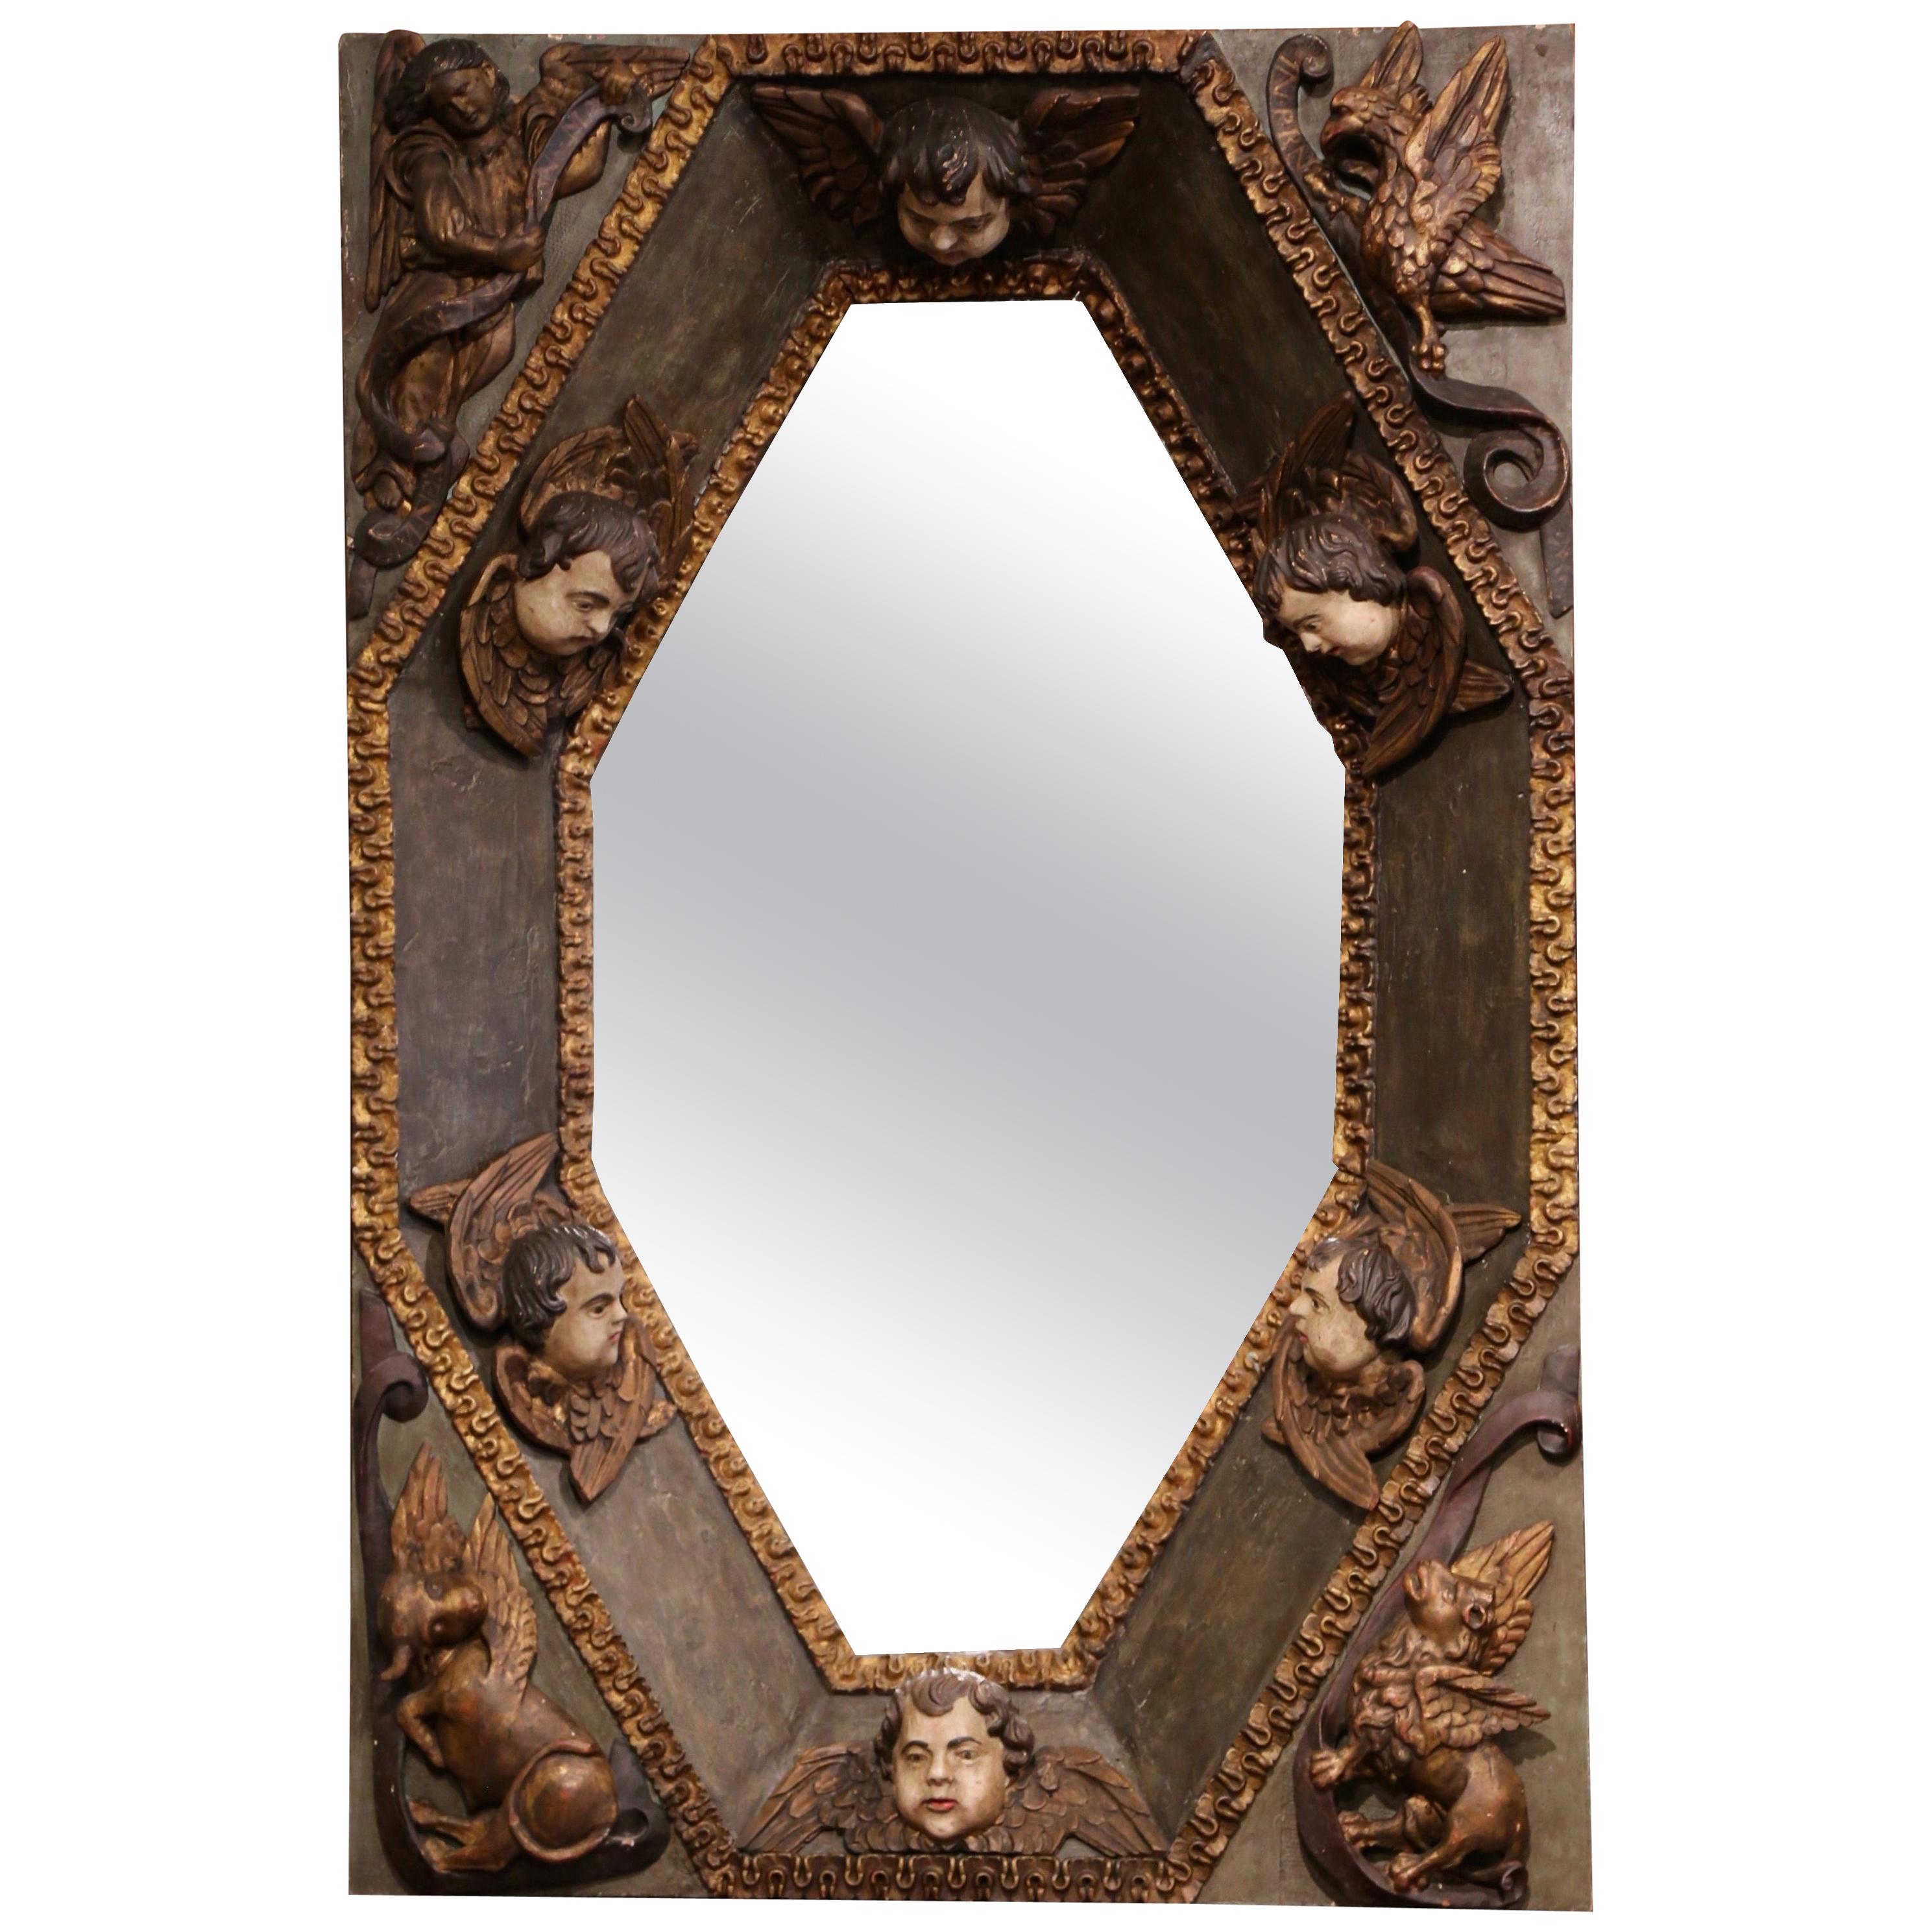 Late 17th Century Spanish Carved Painted and Polychrome Ceiling Mirror